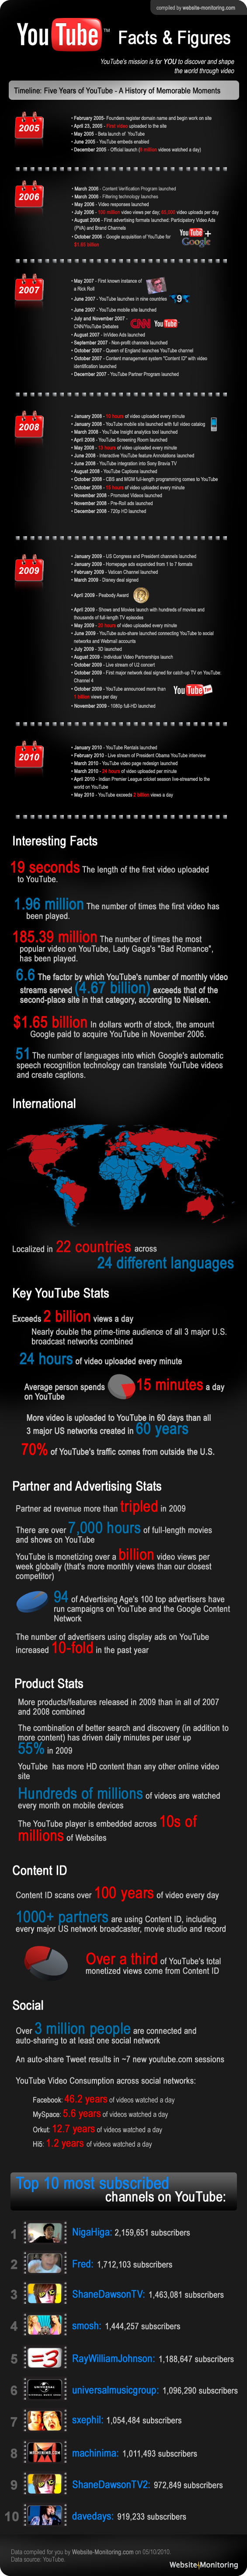 YouTube Facts & Figures